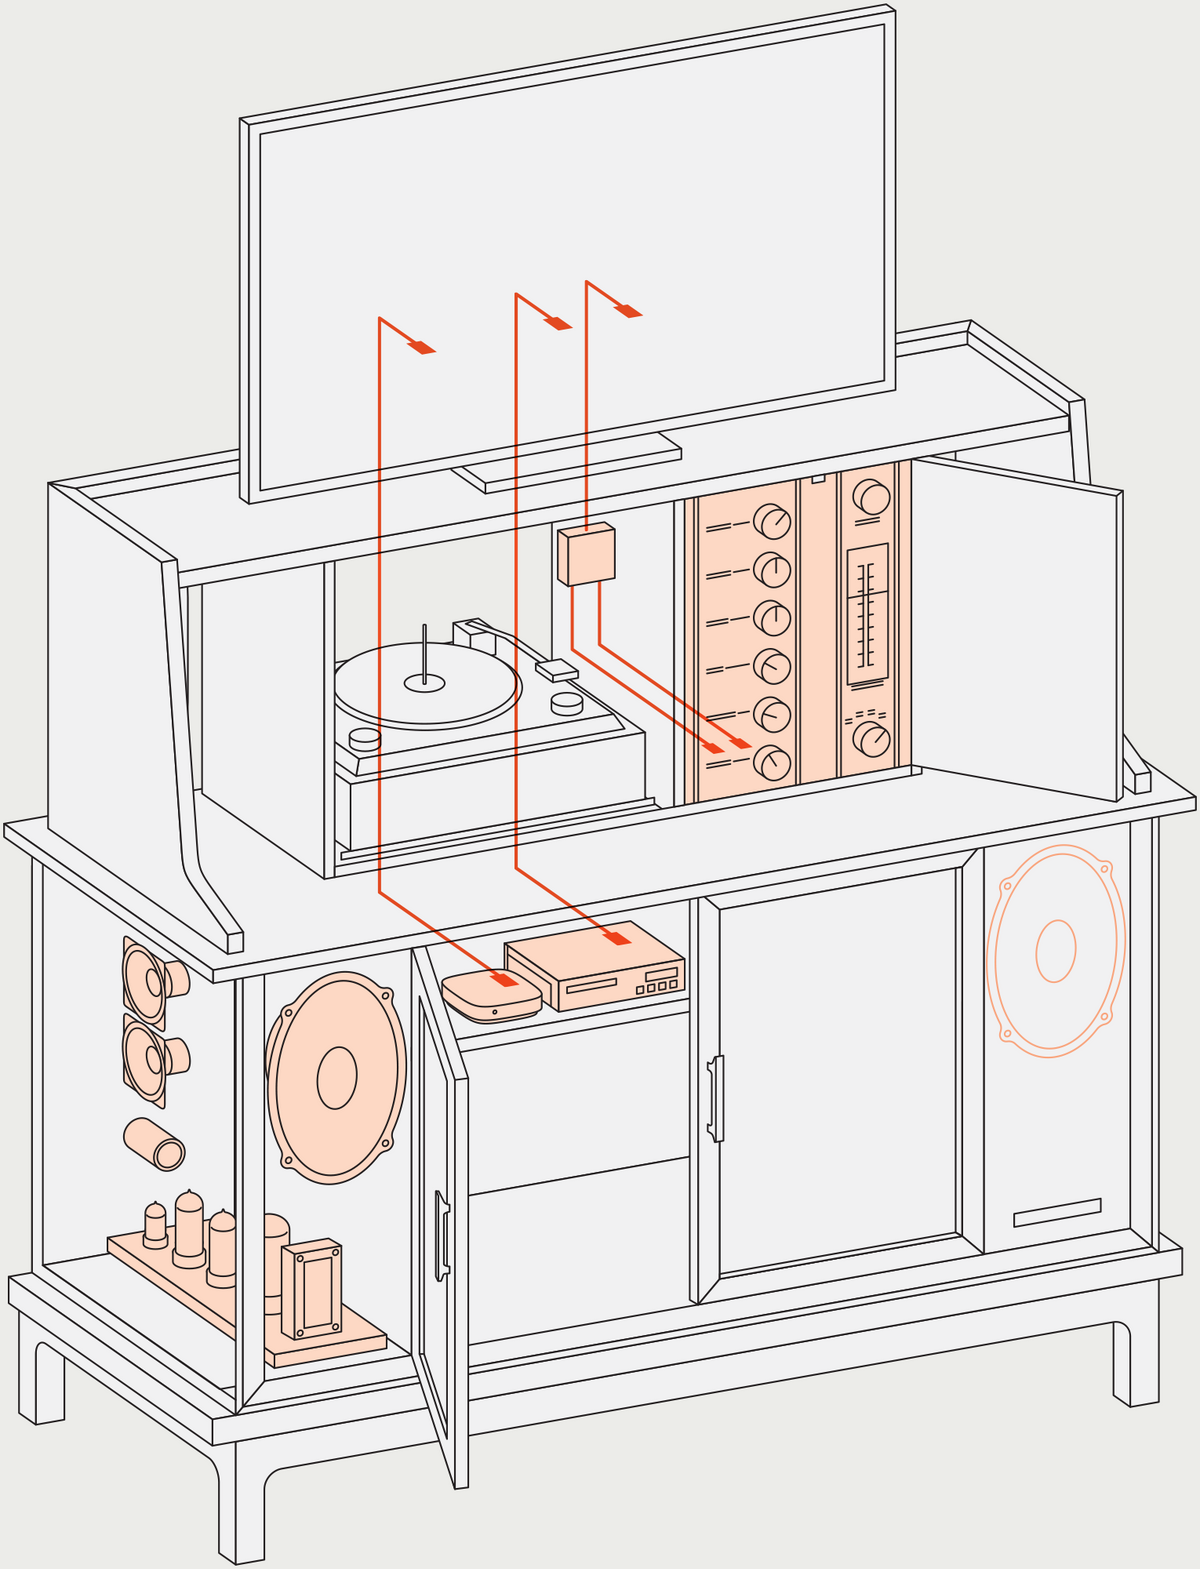 A semi-transparant illustration of a hi-fi cabinet with a flatscreen TV standing on top. Behind doors can be seen a turntable, controls, radio tuner, Blu-ray player, and internet TV box. Also visible are loudspeakers, an electronics chassis with a transformers and vacuum tubes, an audio converter box, and wires connecting the flatscreen to the Bluray player, internet TV and the stereo.